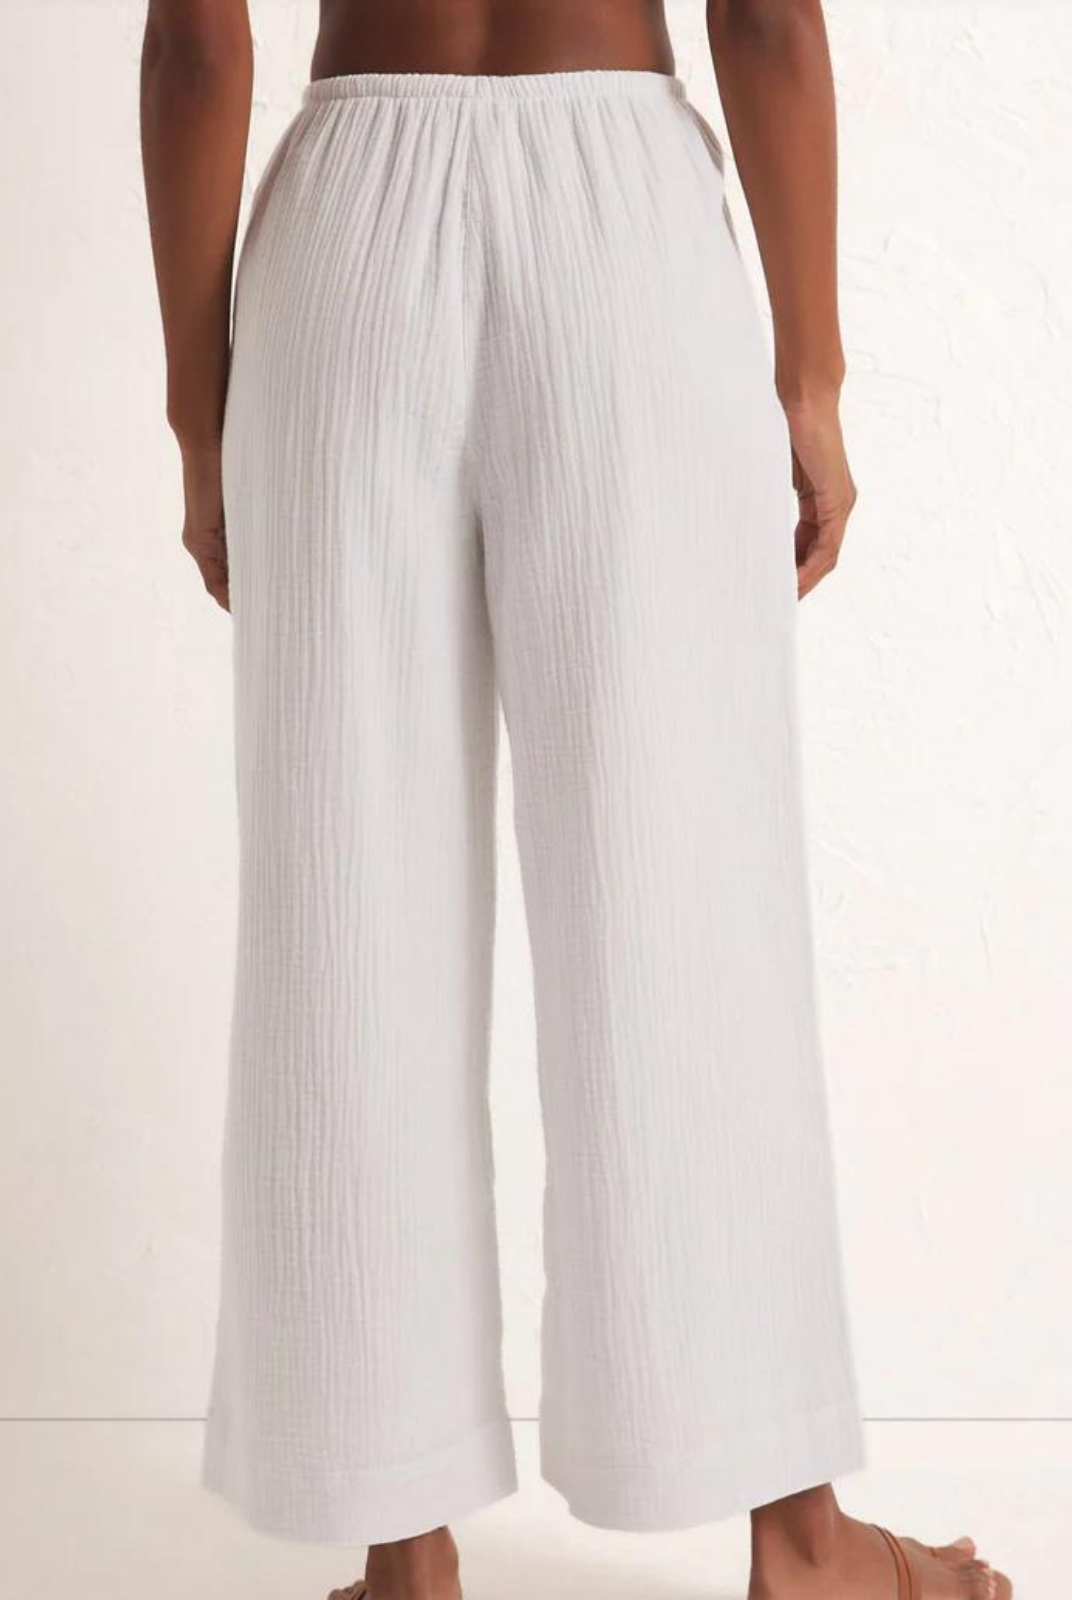 Z Supply Barbados Gauze Pant The easiest pant you'll ever wear. This relaxed, wide leg pant features a shorter length than our Bondi Gauze Pant and a more narrow pull-on elastic waistband for all day comfort.